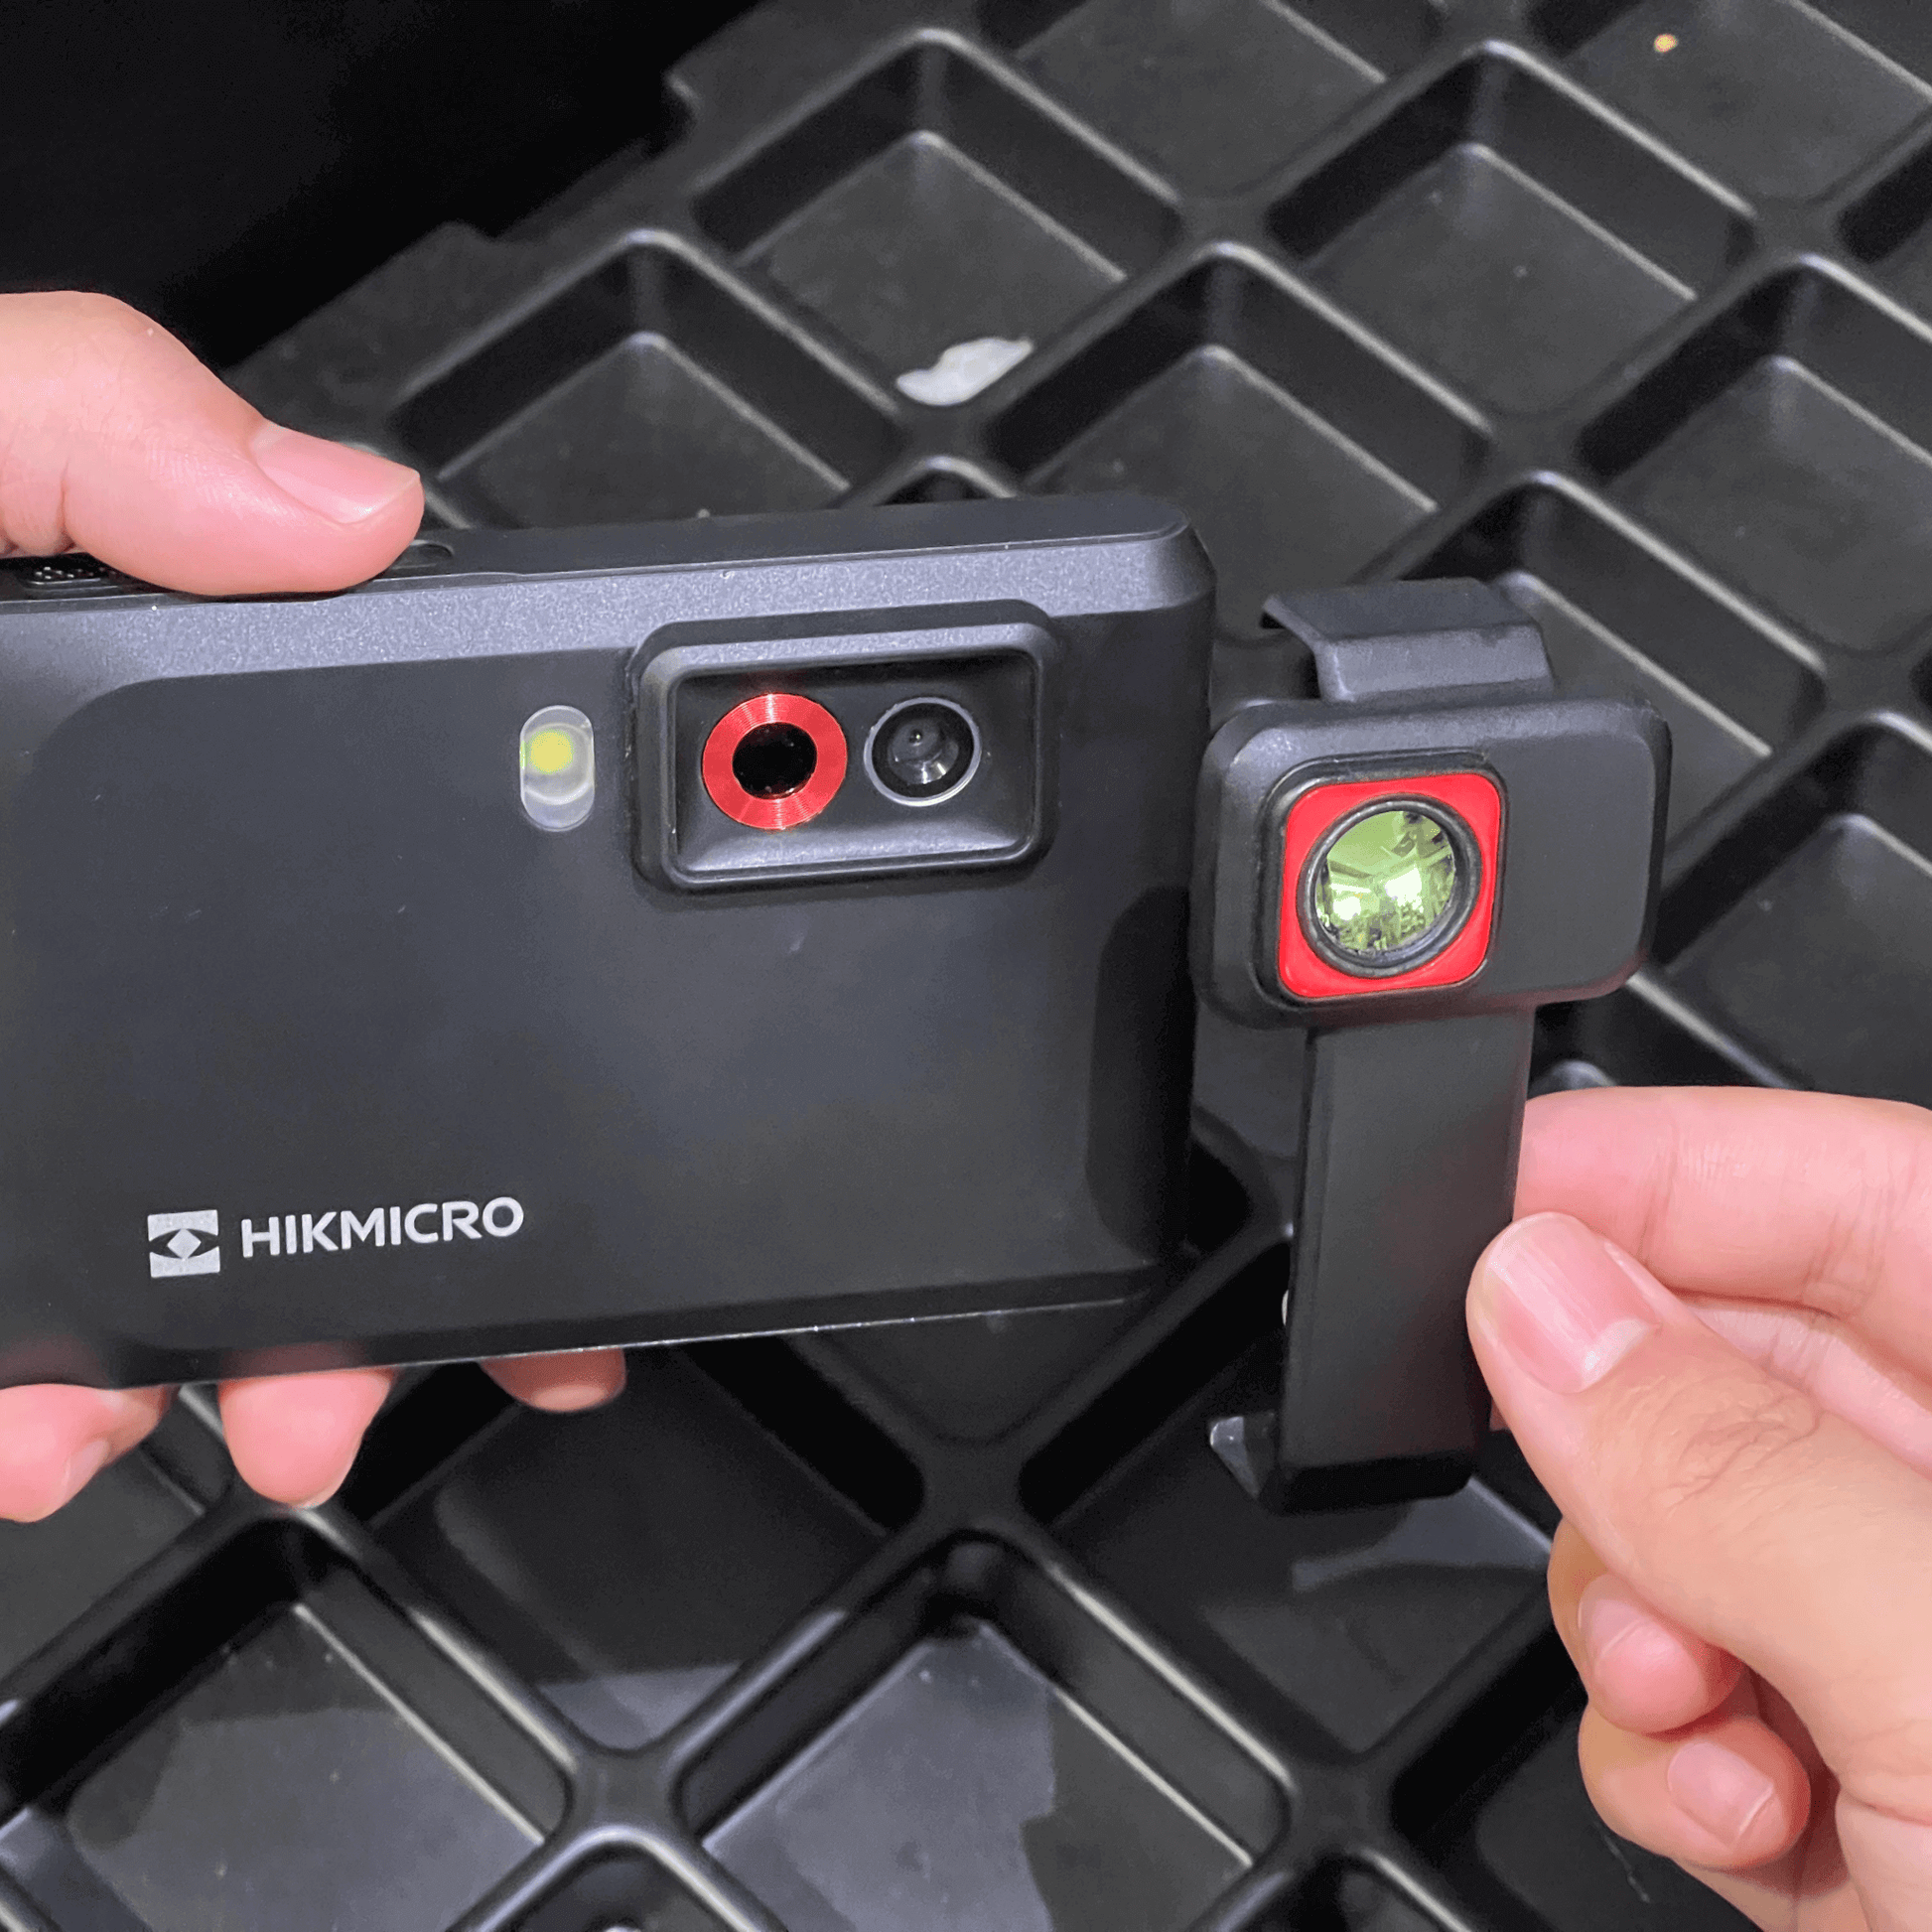 Macro Lens for the HikMicro Pocket Series Handheld Thermal Camera Device Attachment